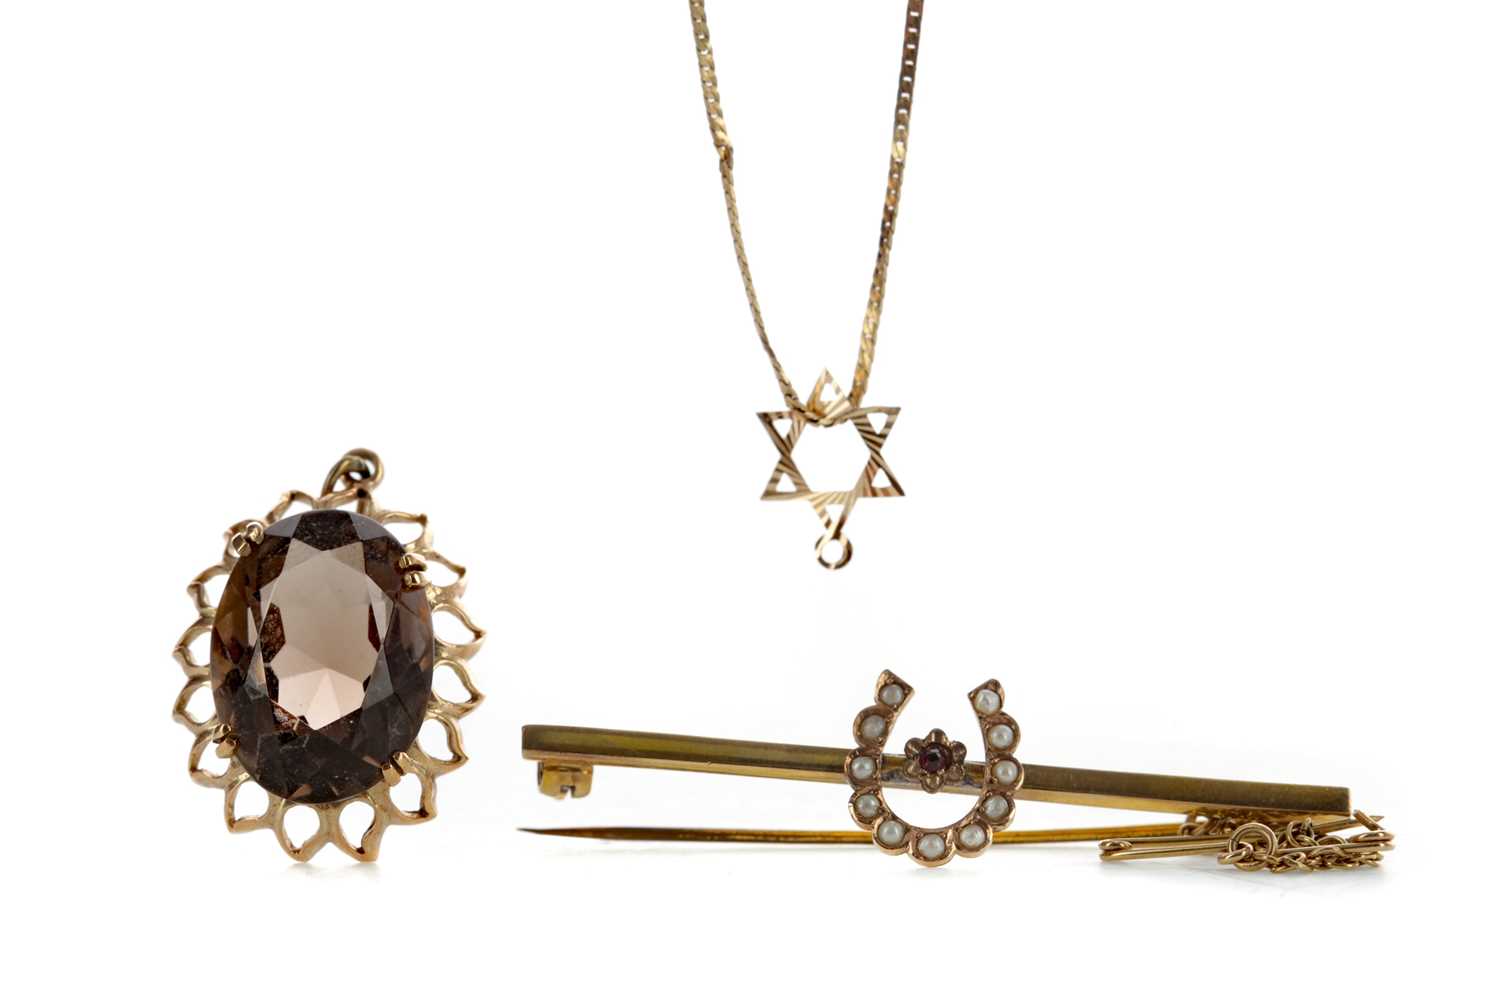 Lot 802 - A SMOKY QUARTZ PENDANT, SEED PEARL BAR BROOCH AND A STAR OF DAVID CHAIN